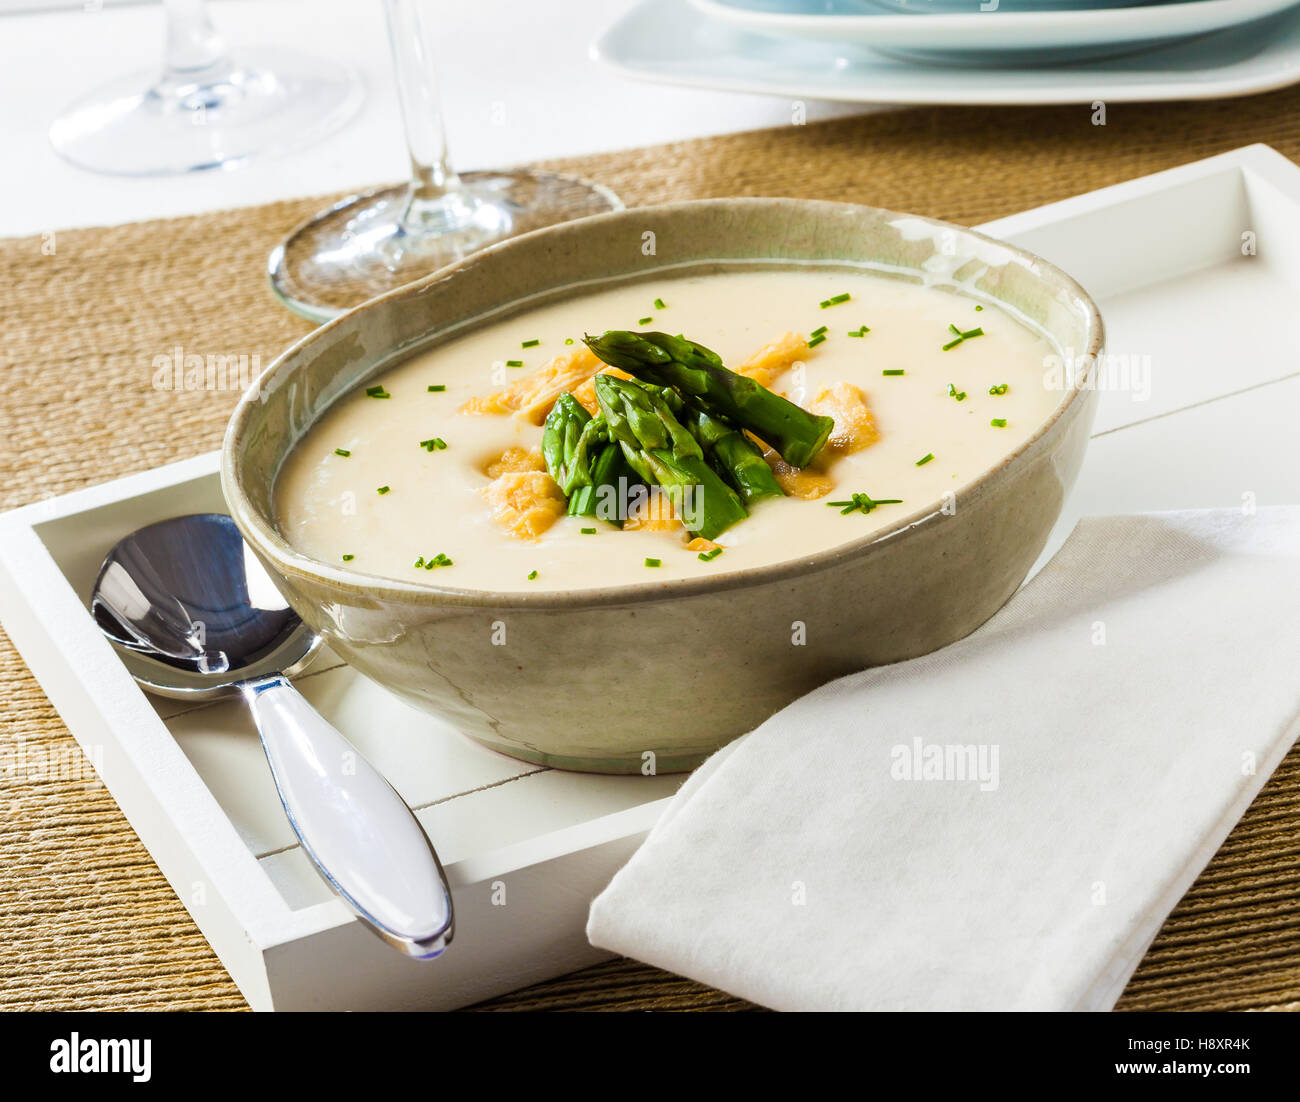 Asparagus cream soup with chicken in a bowl on a white tray. Stock Photo